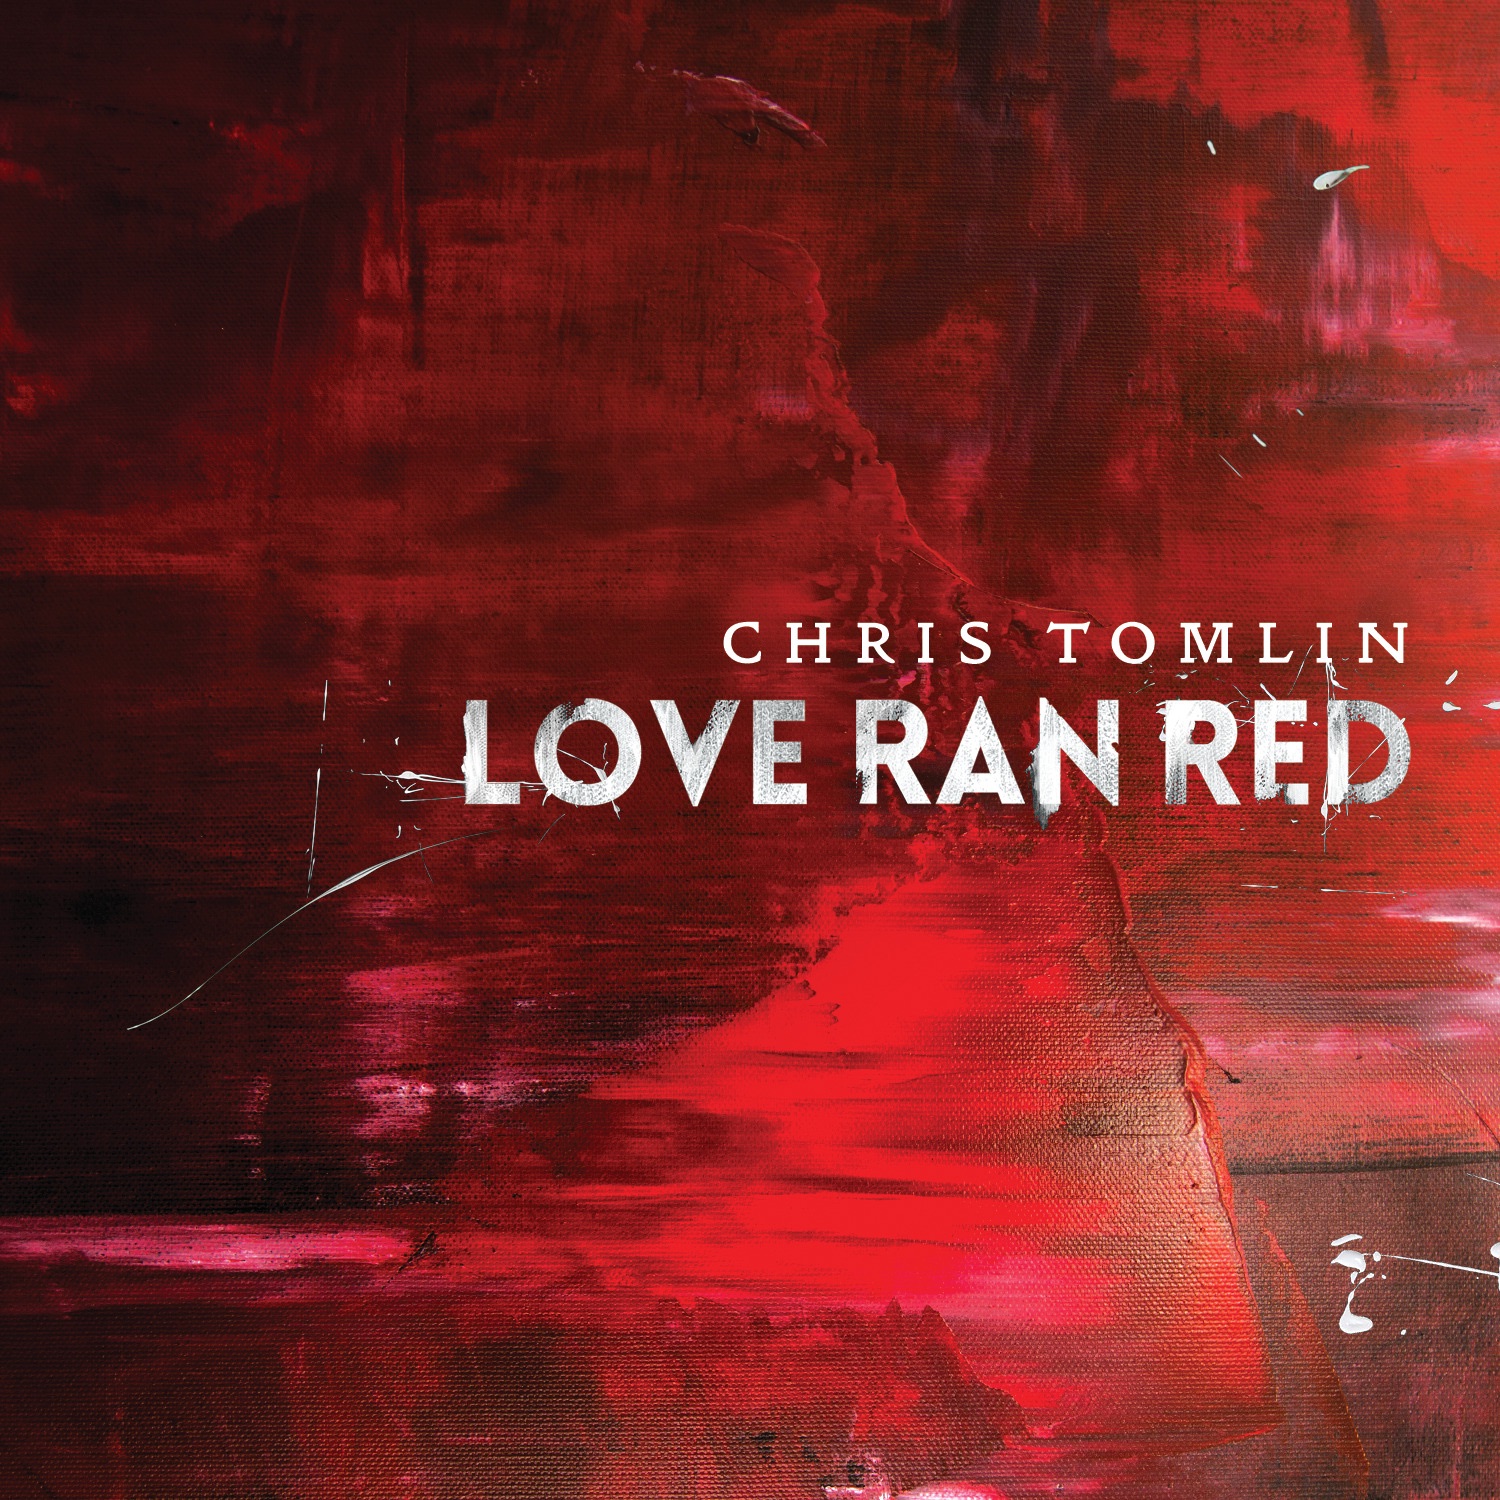 Art for At the Cross (Love Ran Red) by Chris Tomlin